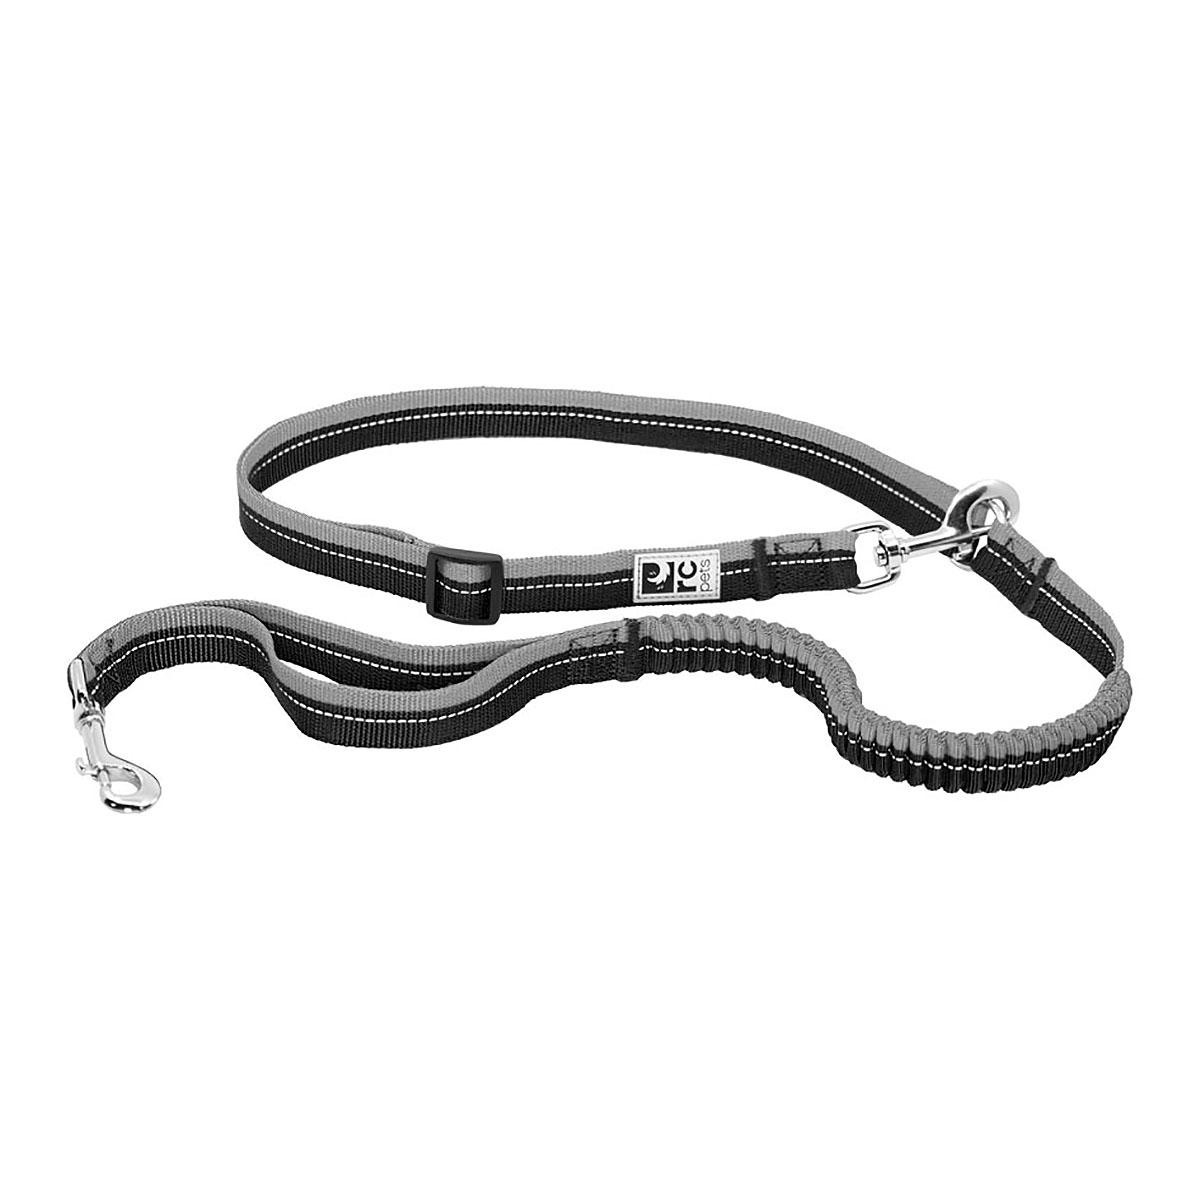 Bungee Active Dog Leash by RC Pets - Black